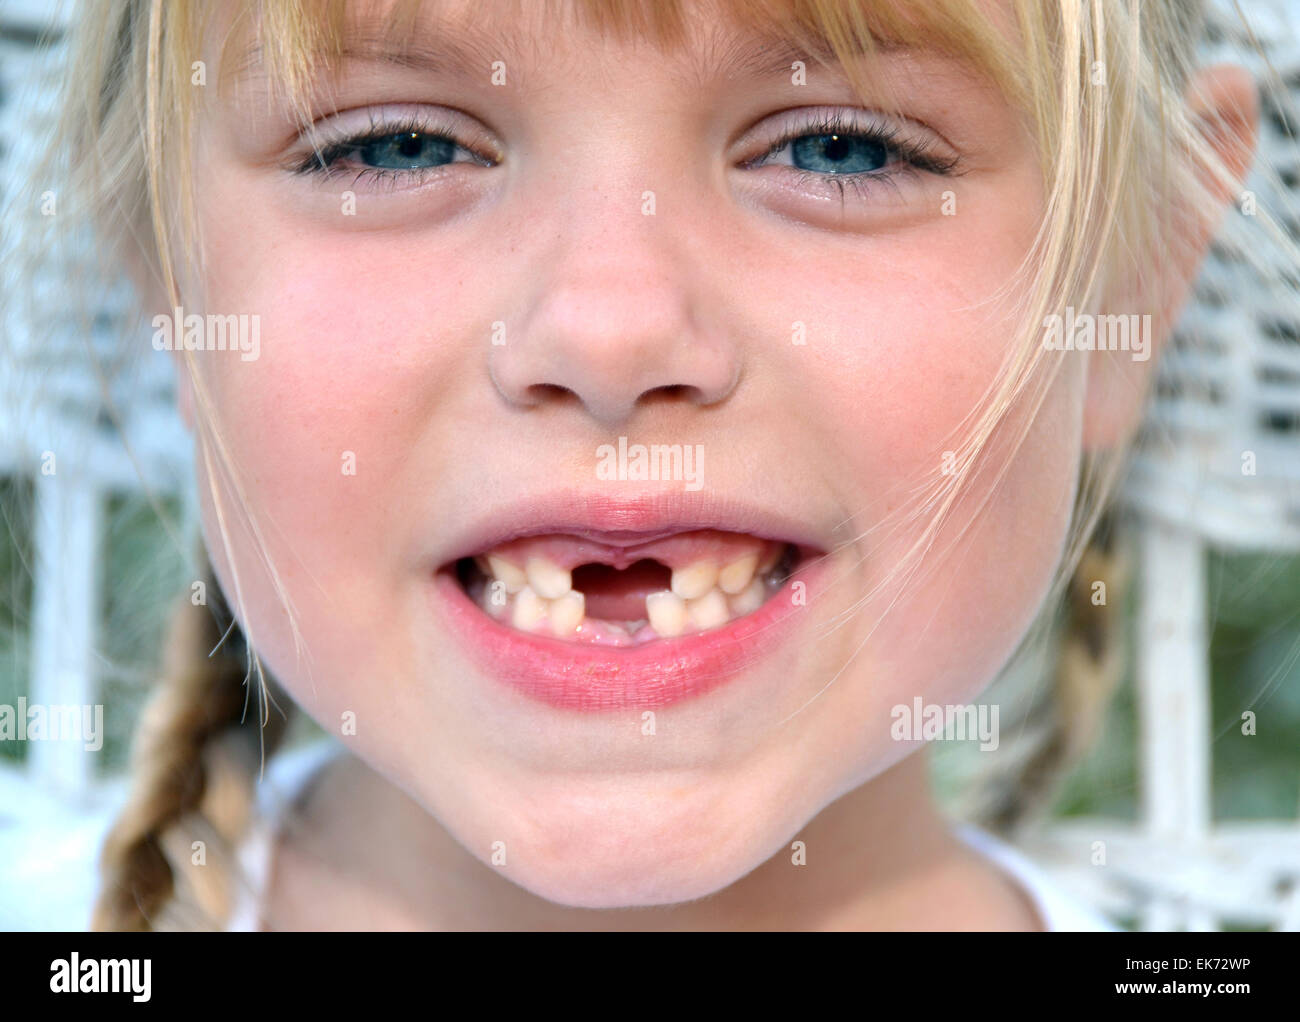 Young Caucasian girl with missing teeth. Stock Photo